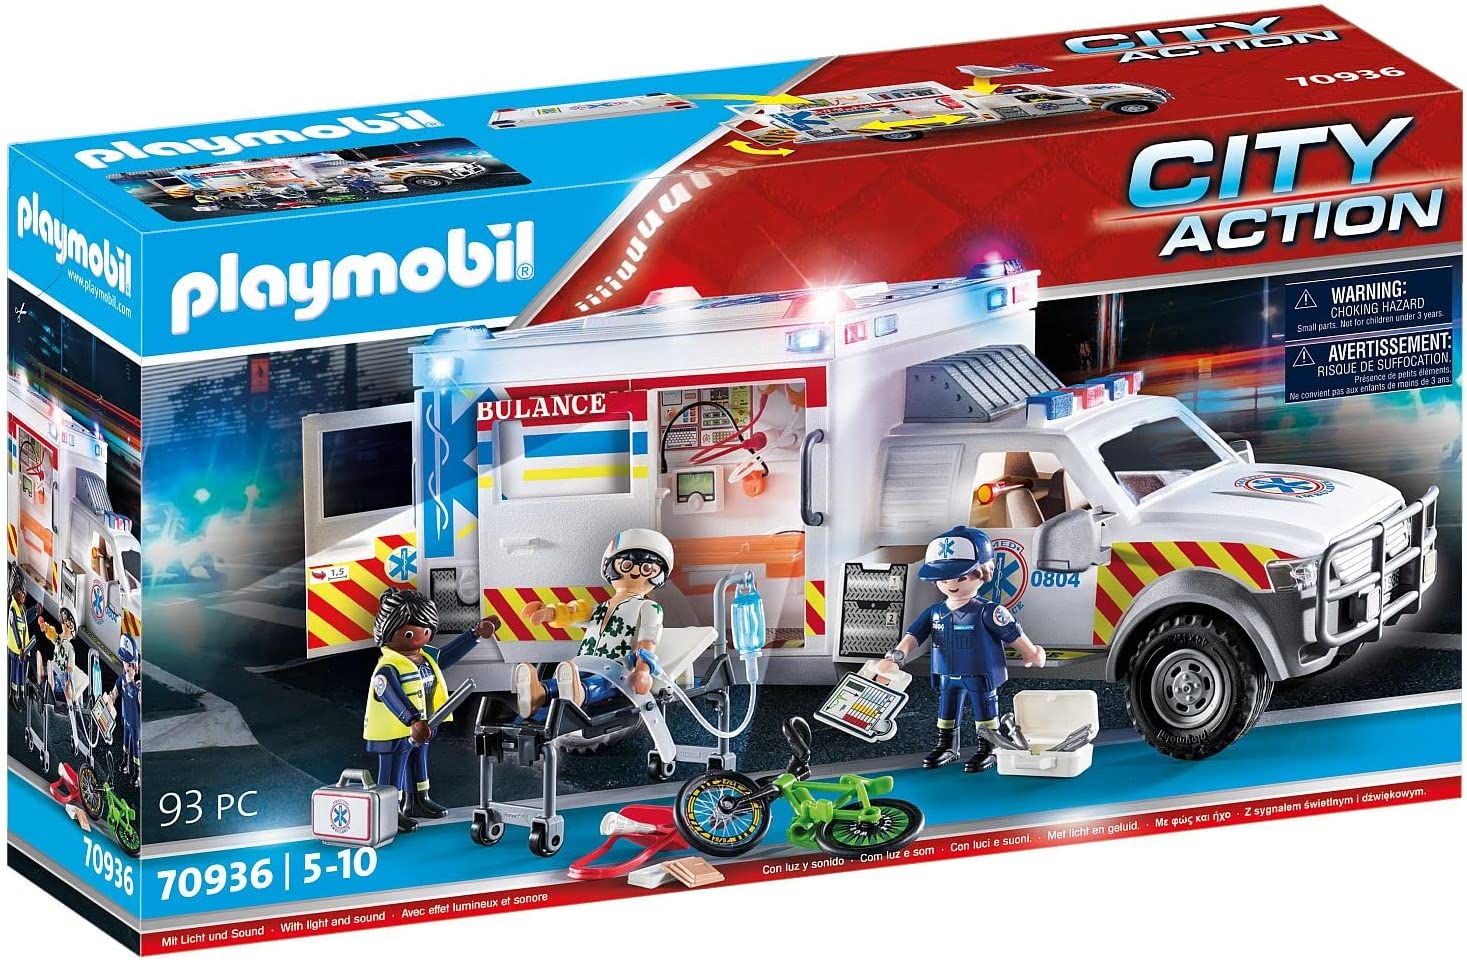 PLAYMOBIL City Action 70936 US Ambulance Rescue Vehicle with Light and Sound Toy for Children Aged 5 and Up